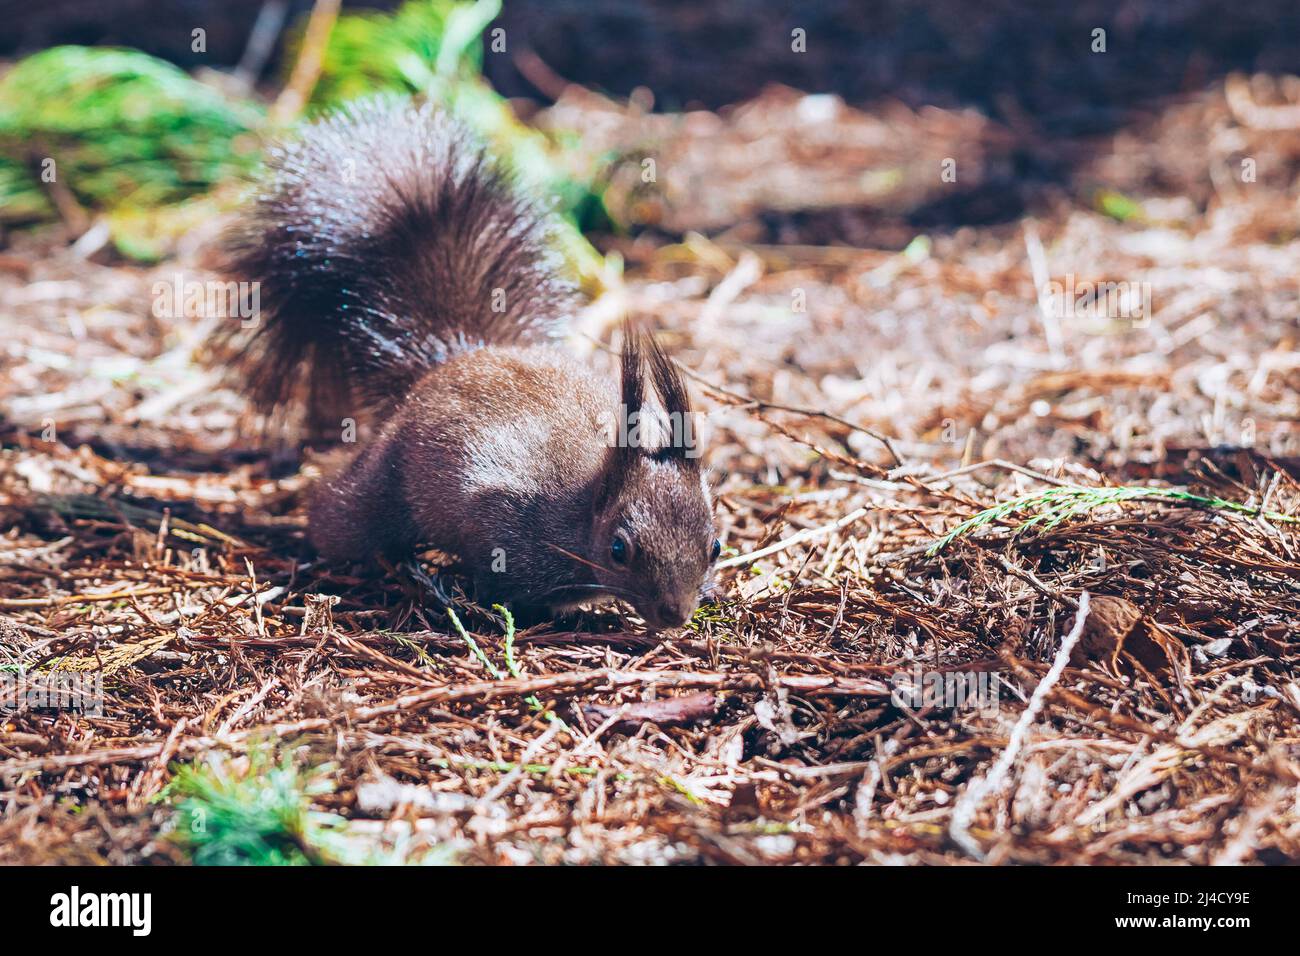 Wild nature. Cute red squirrel with long pointed ears in autumn scene . Wildlife in the forest. Squirrel sitting on the ground. Sciurus vulgaris. Stock Photo